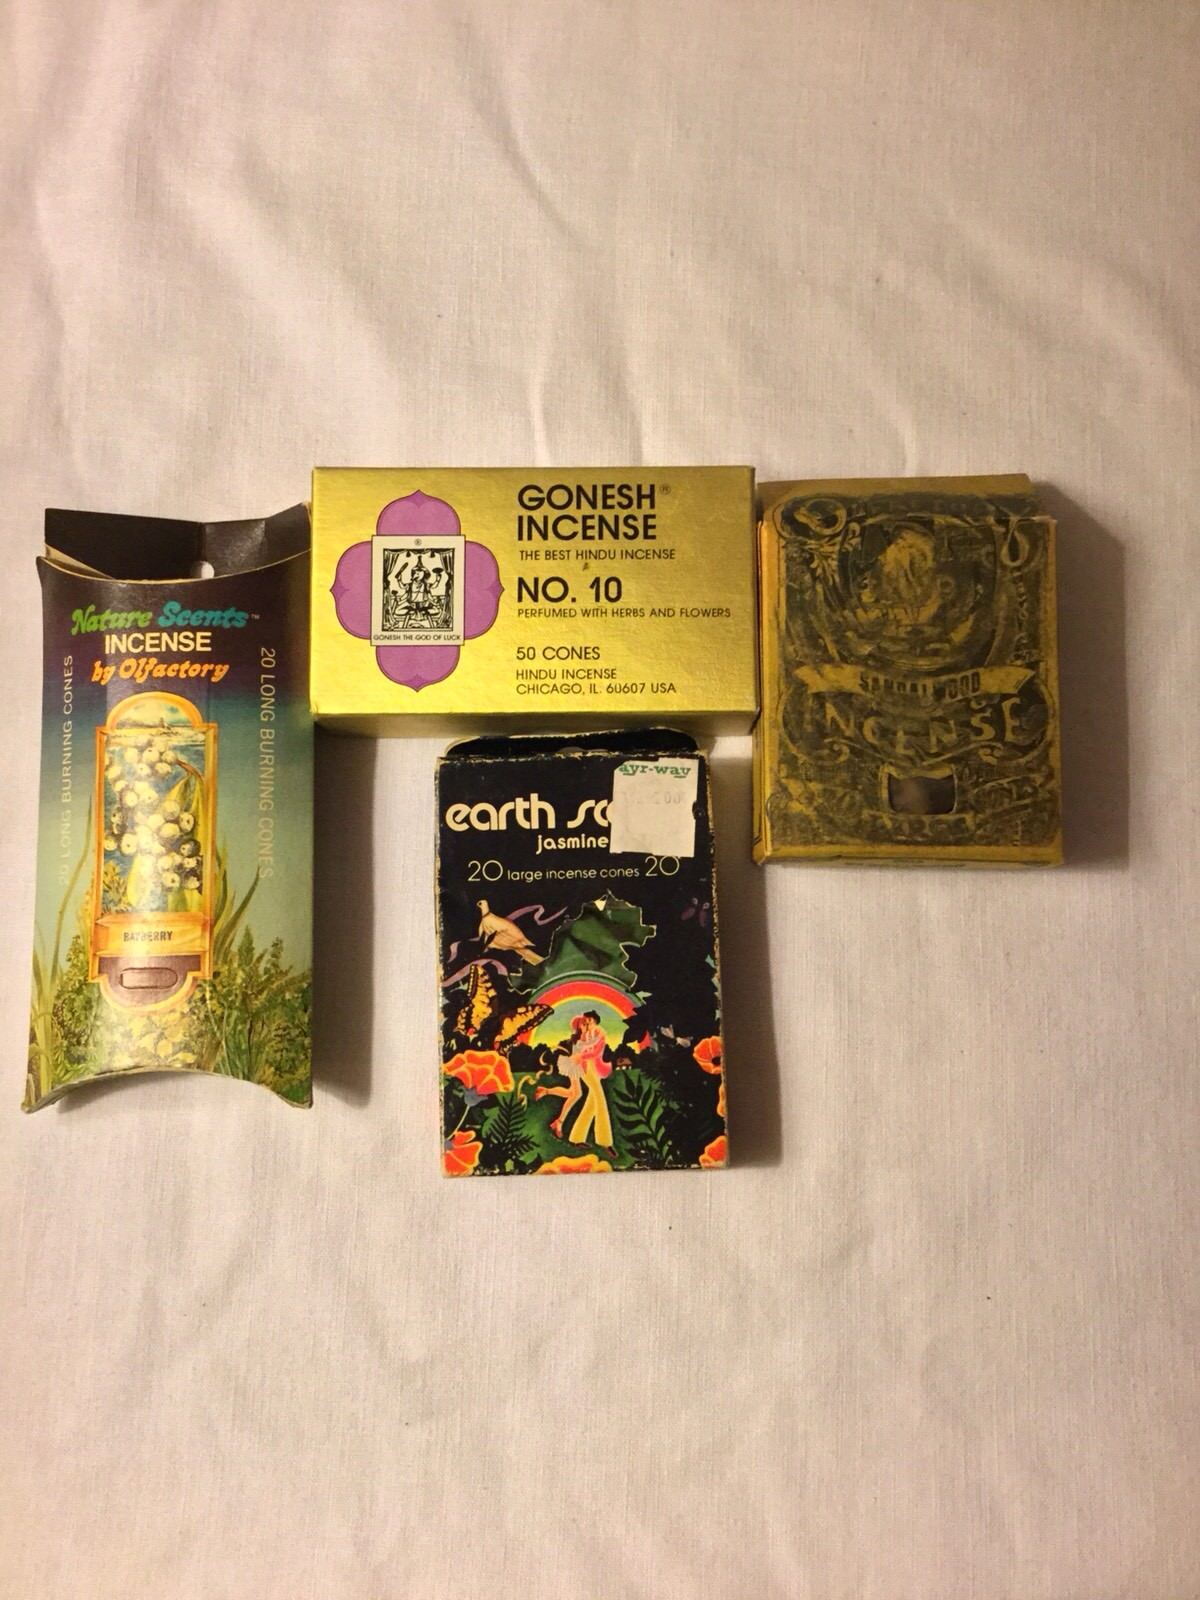 Lot of 4 Incense Vintage never used 1970's Gonesh no. 10 & olfactory 110 cones